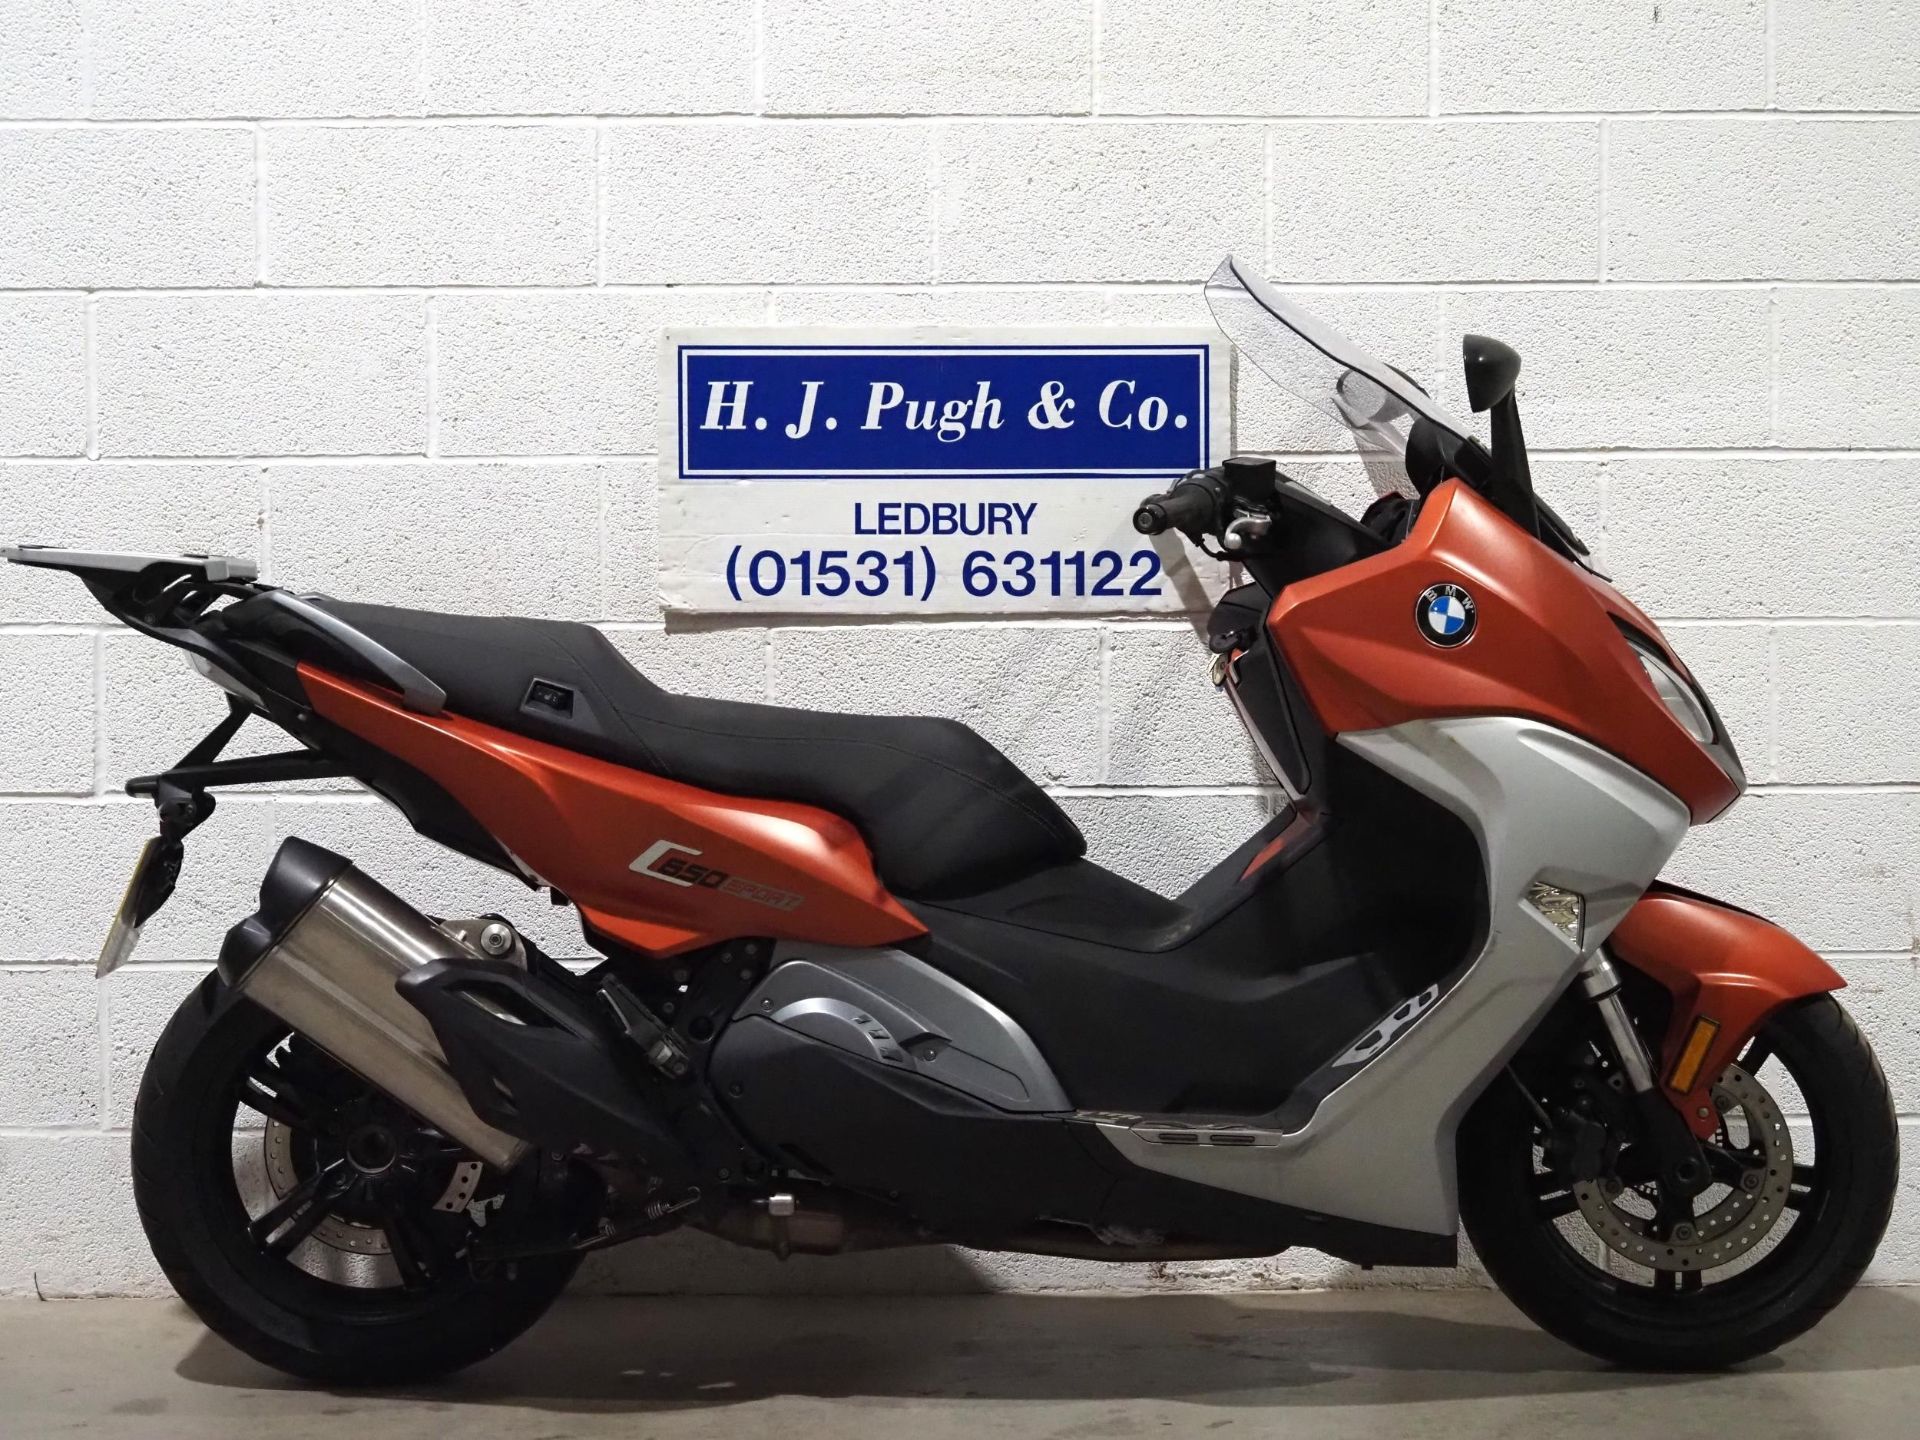 BMW C650 Sport moped. 2016. 647cc. Non runner. Engine turns over and last run in 2020. Comes with